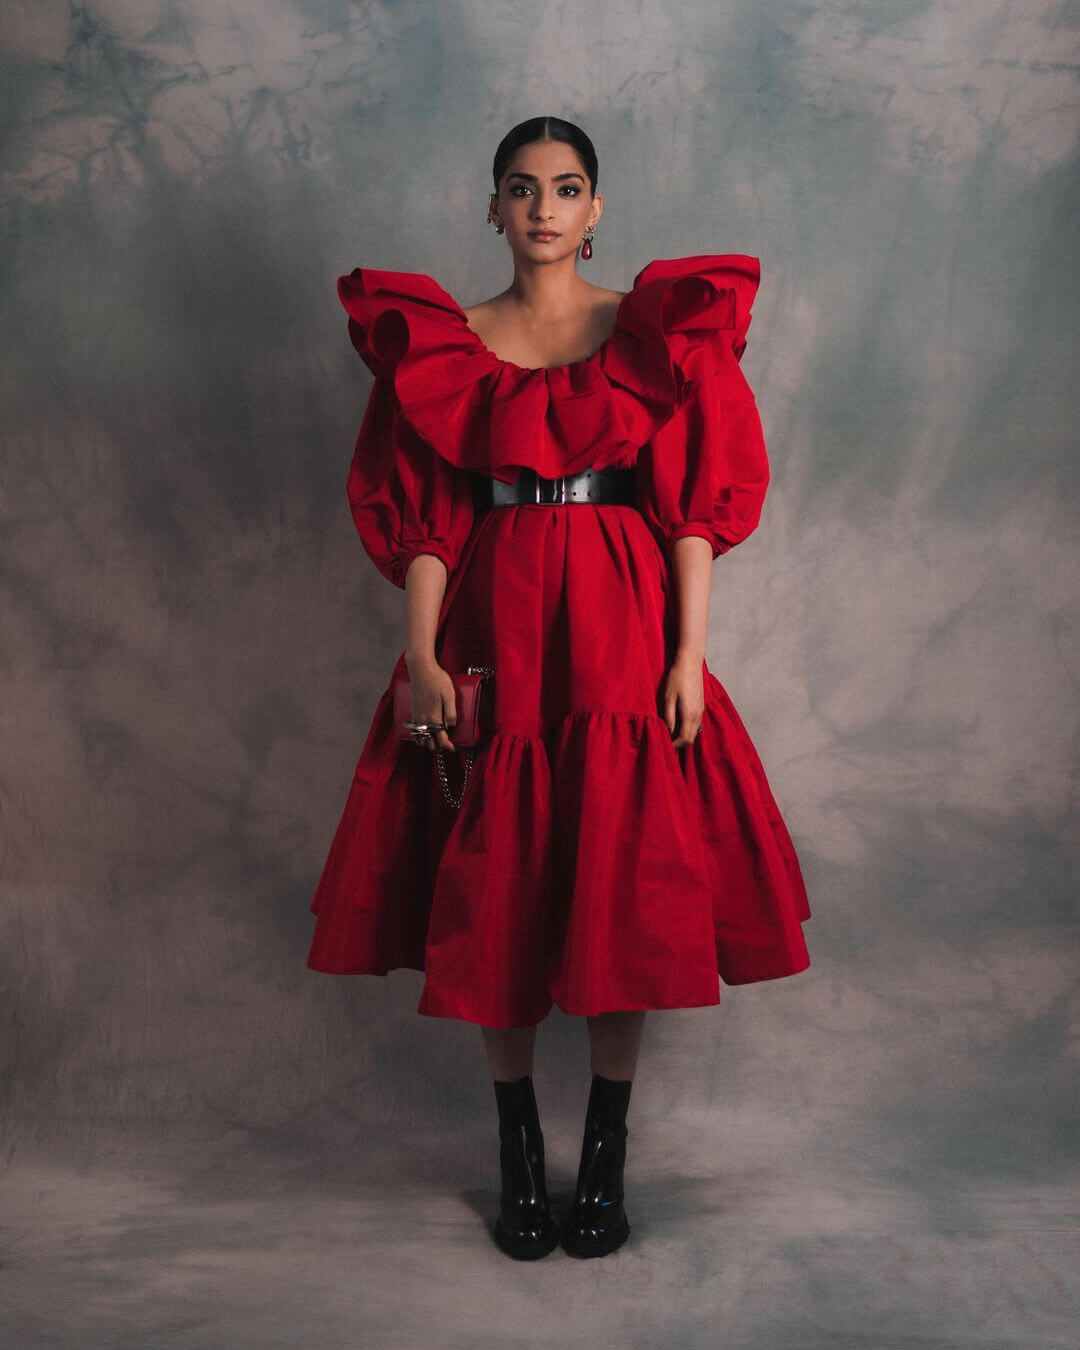 Sonam Kapoor: A Vision of Magnificence in Red